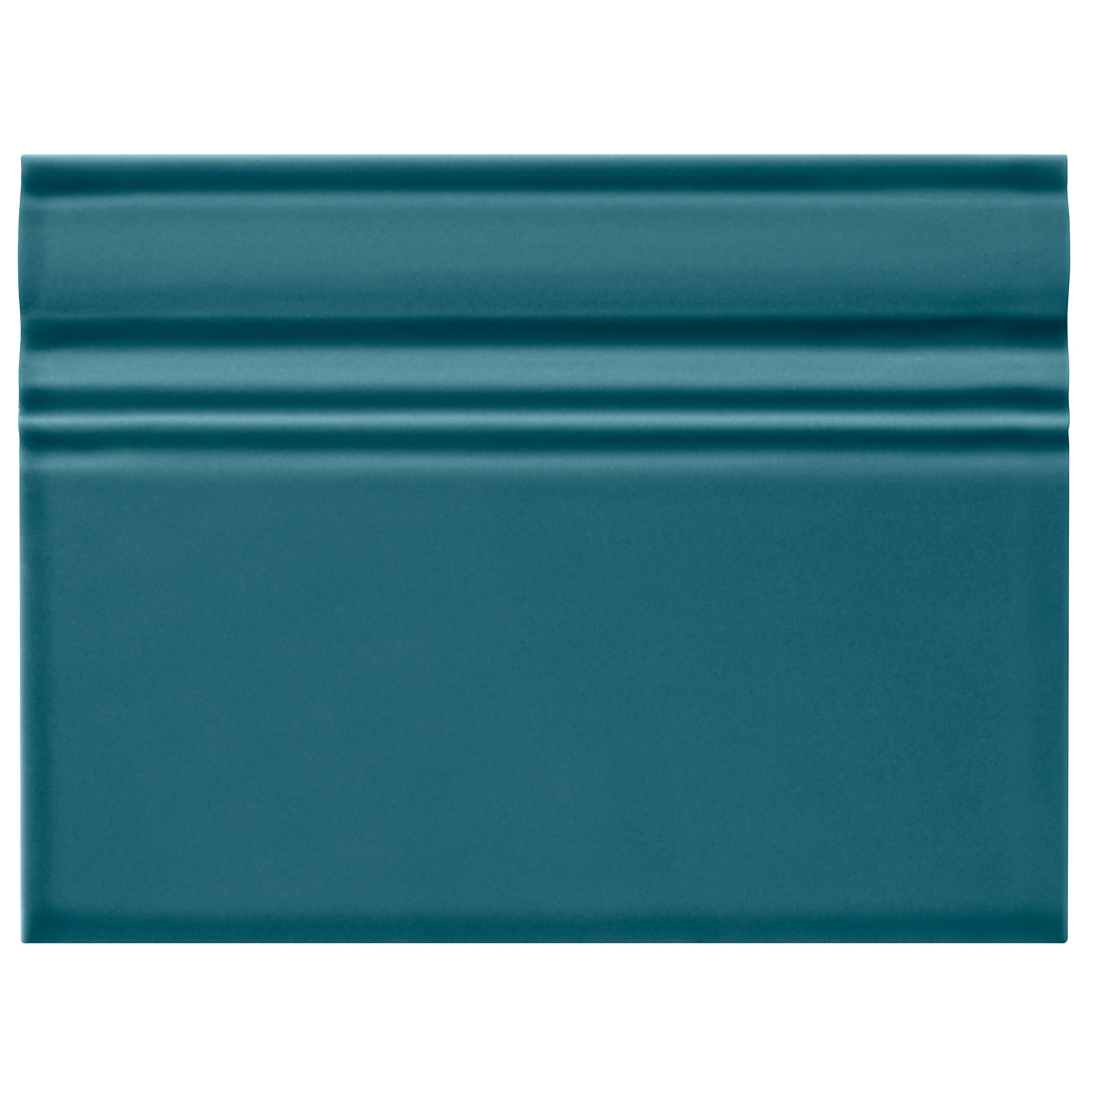 Imperial Turquoise Gls  Skirting 20cm